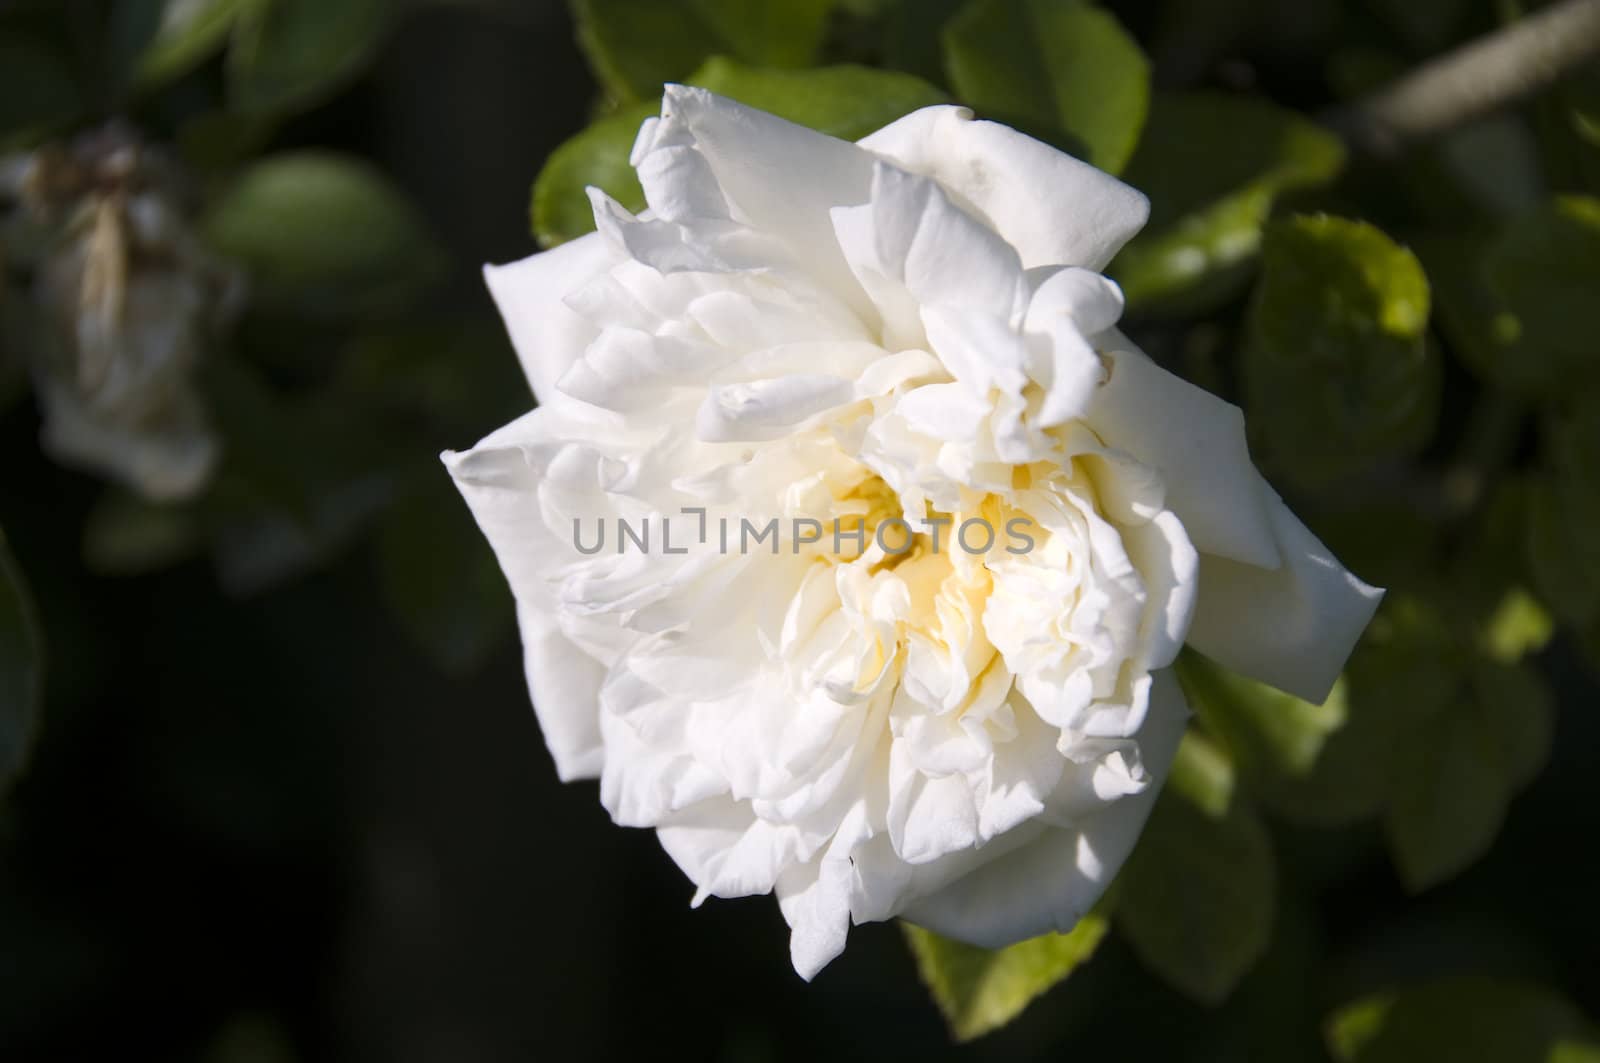 A white rose with dark foliage in the background